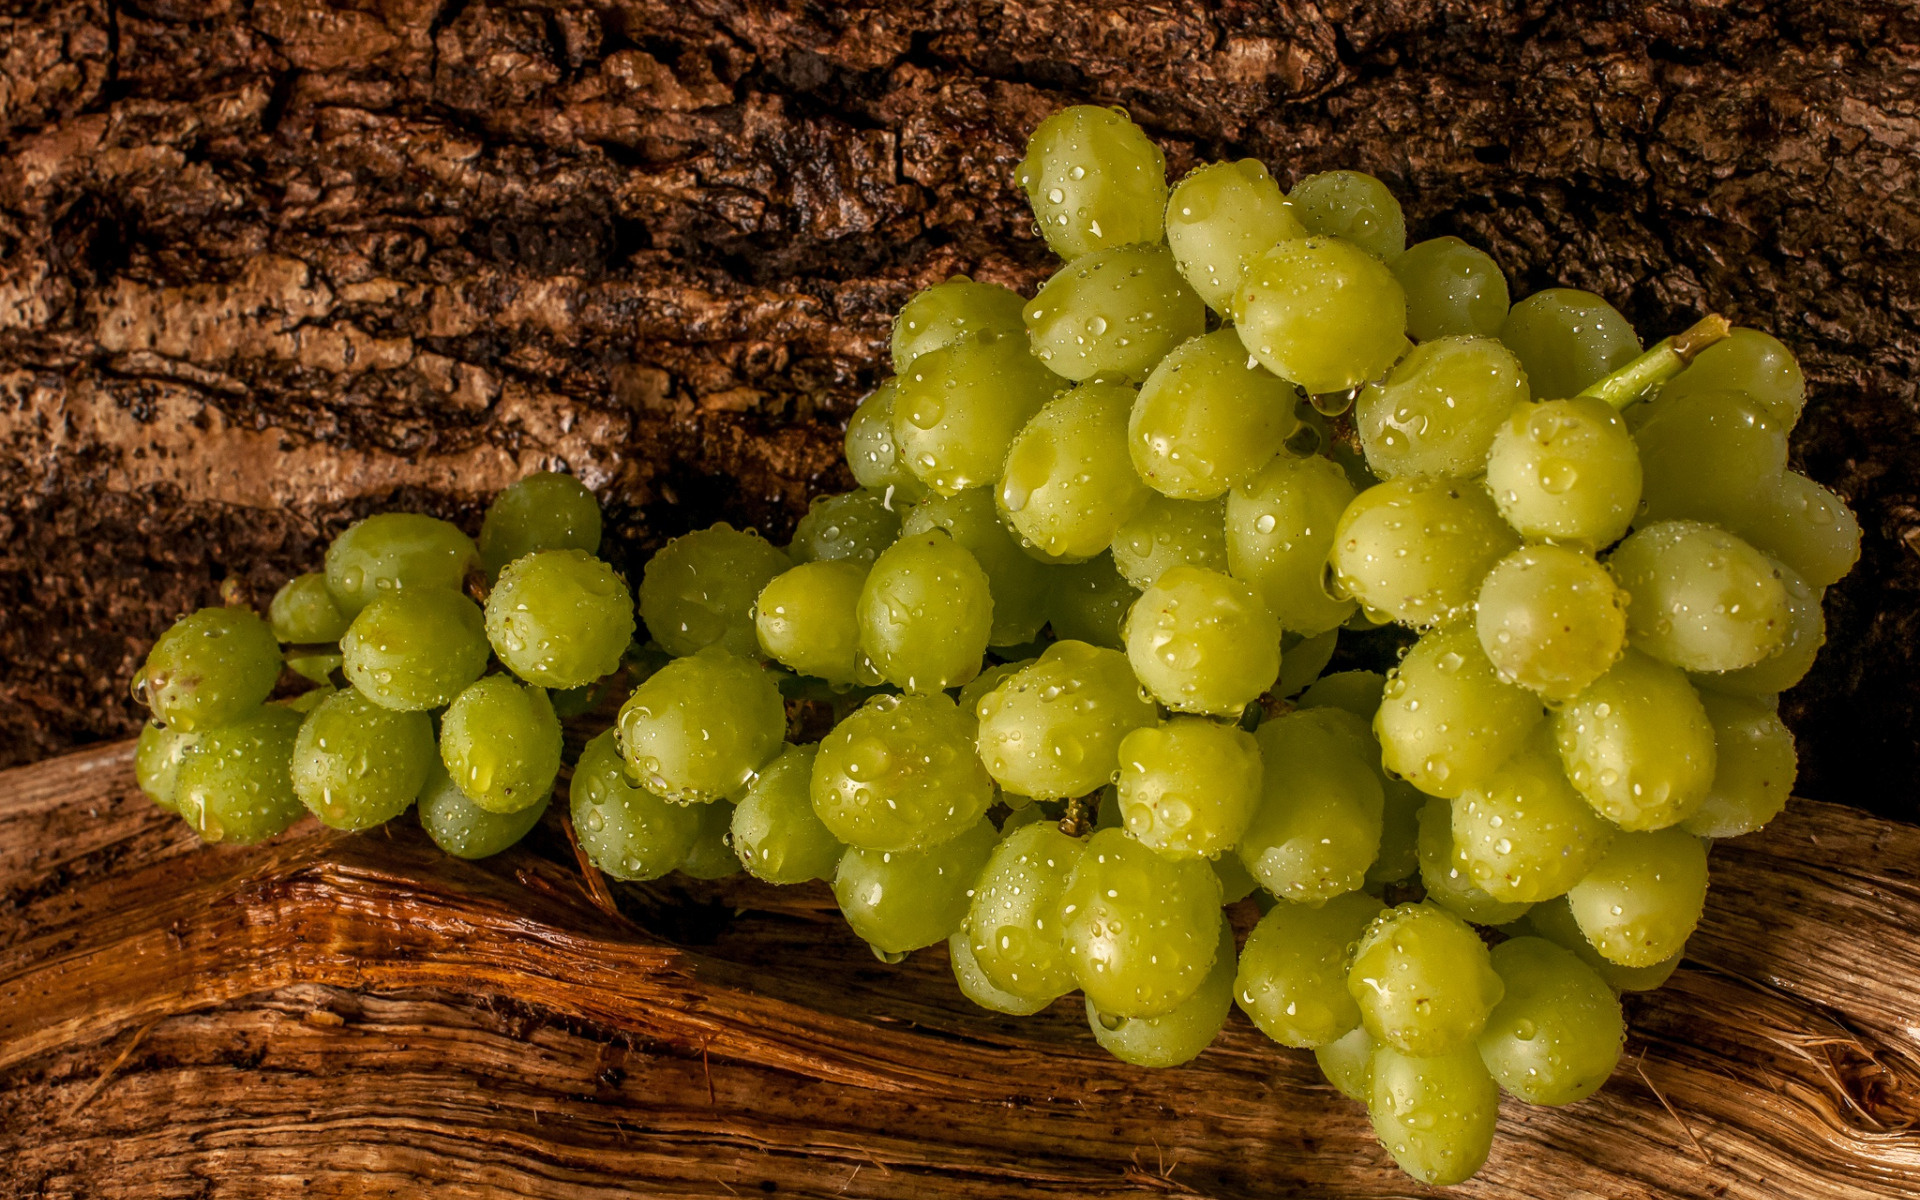 Grapes: Fleshy, rounded fruits that grow in clusters made up of many fruits of greenish, yellowish, or purple skin. 1920x1200 HD Wallpaper.